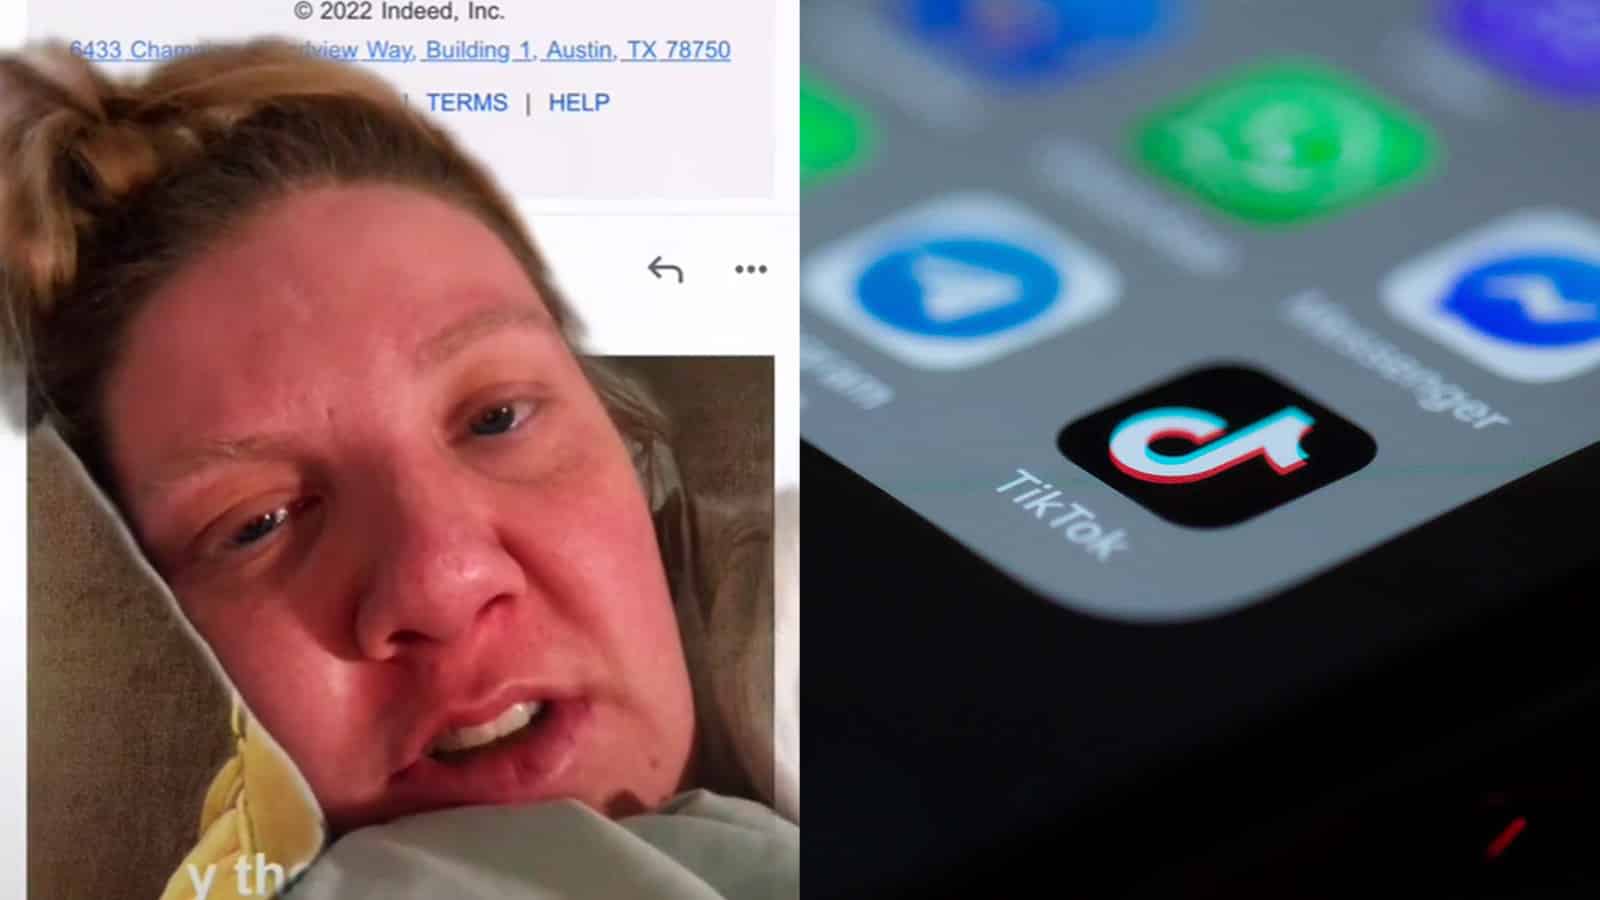 SwedishSwan in front of her email with a phone showing the tiktok icon beside her